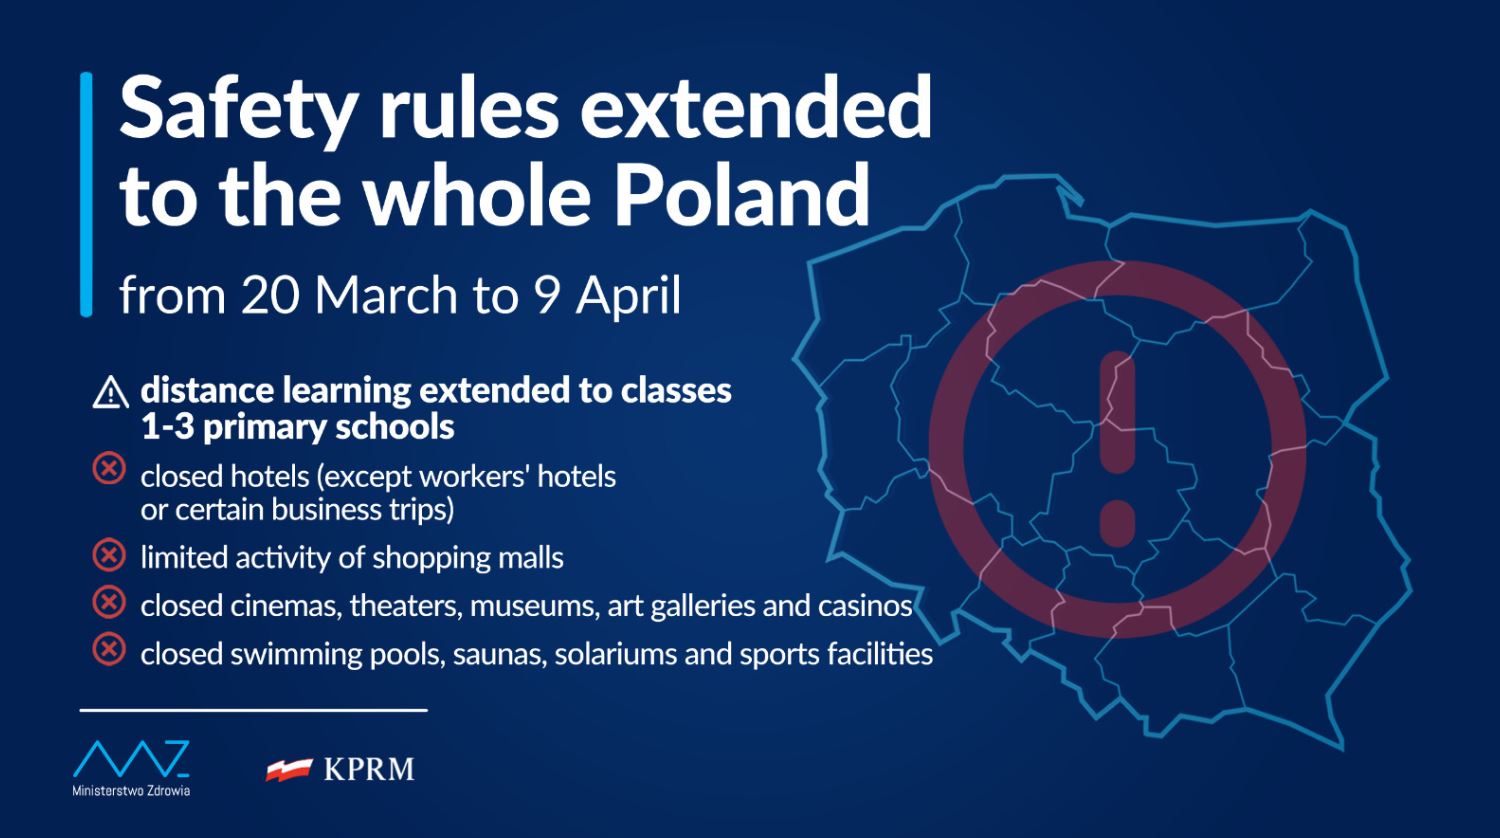 Covid-19 measures in Poland from 20 March